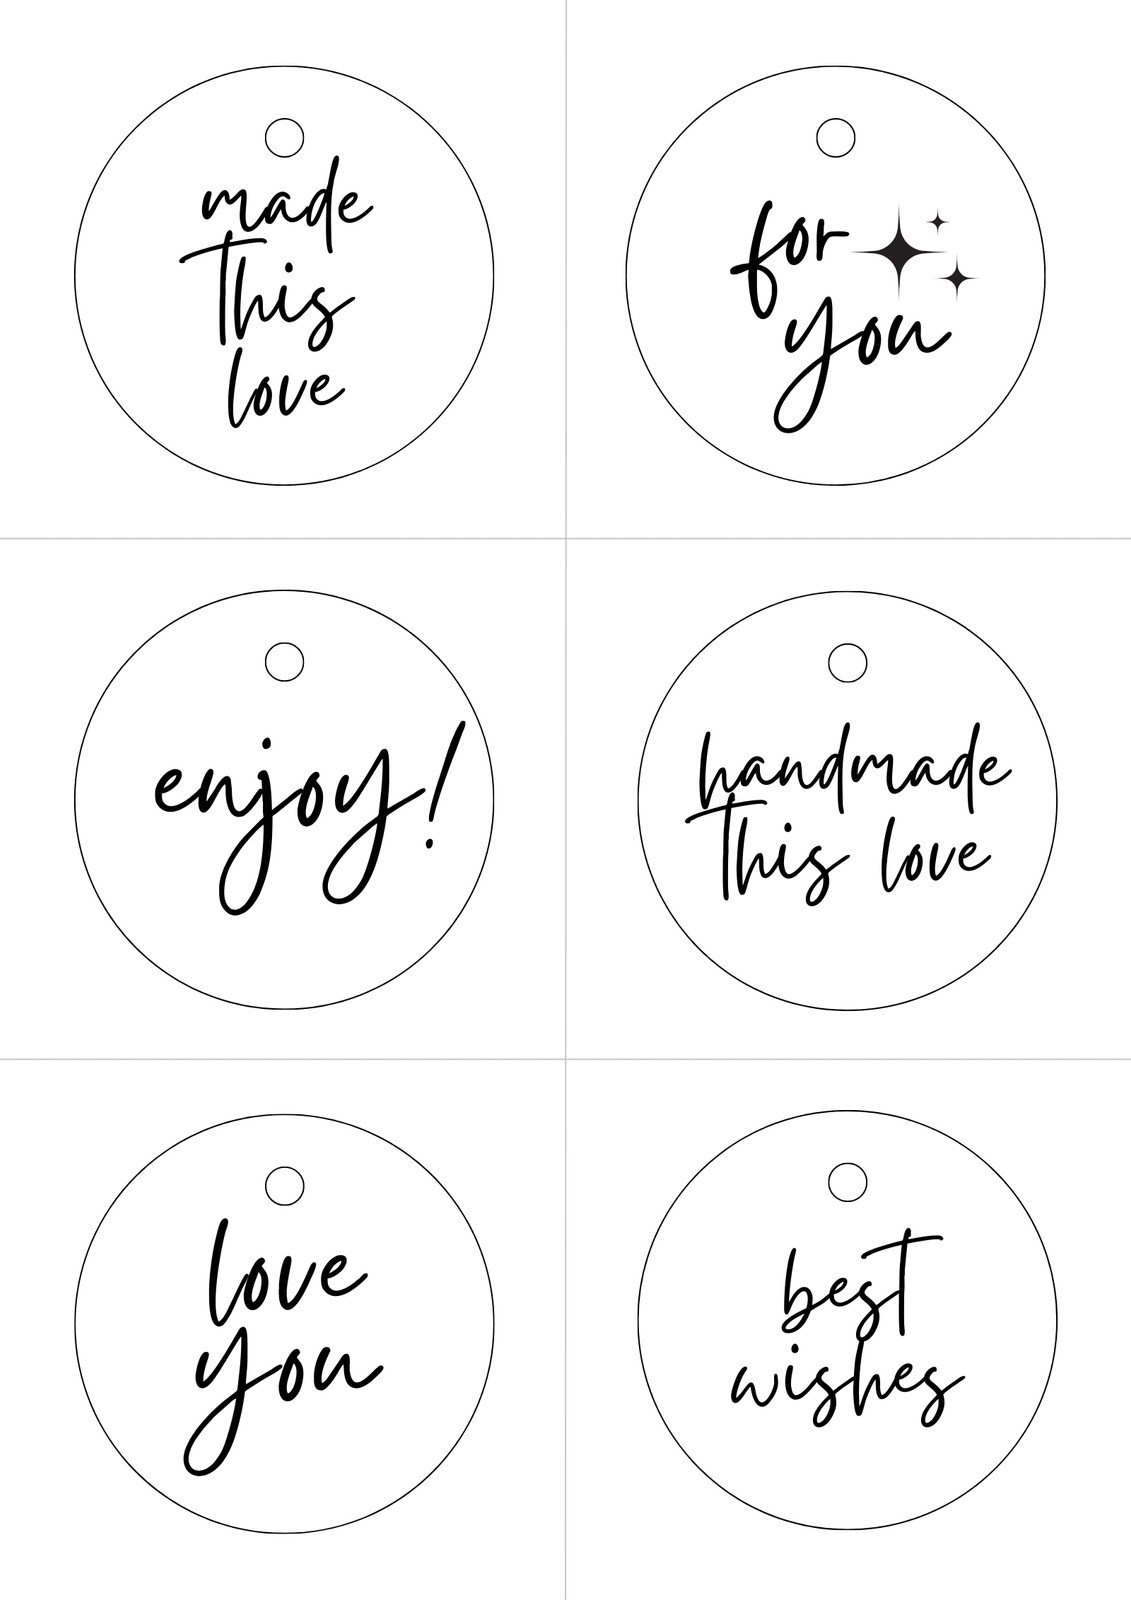 Free, Printable And Customizable Gift Tag Templates | Canva in Free Online Gift Tags Printable